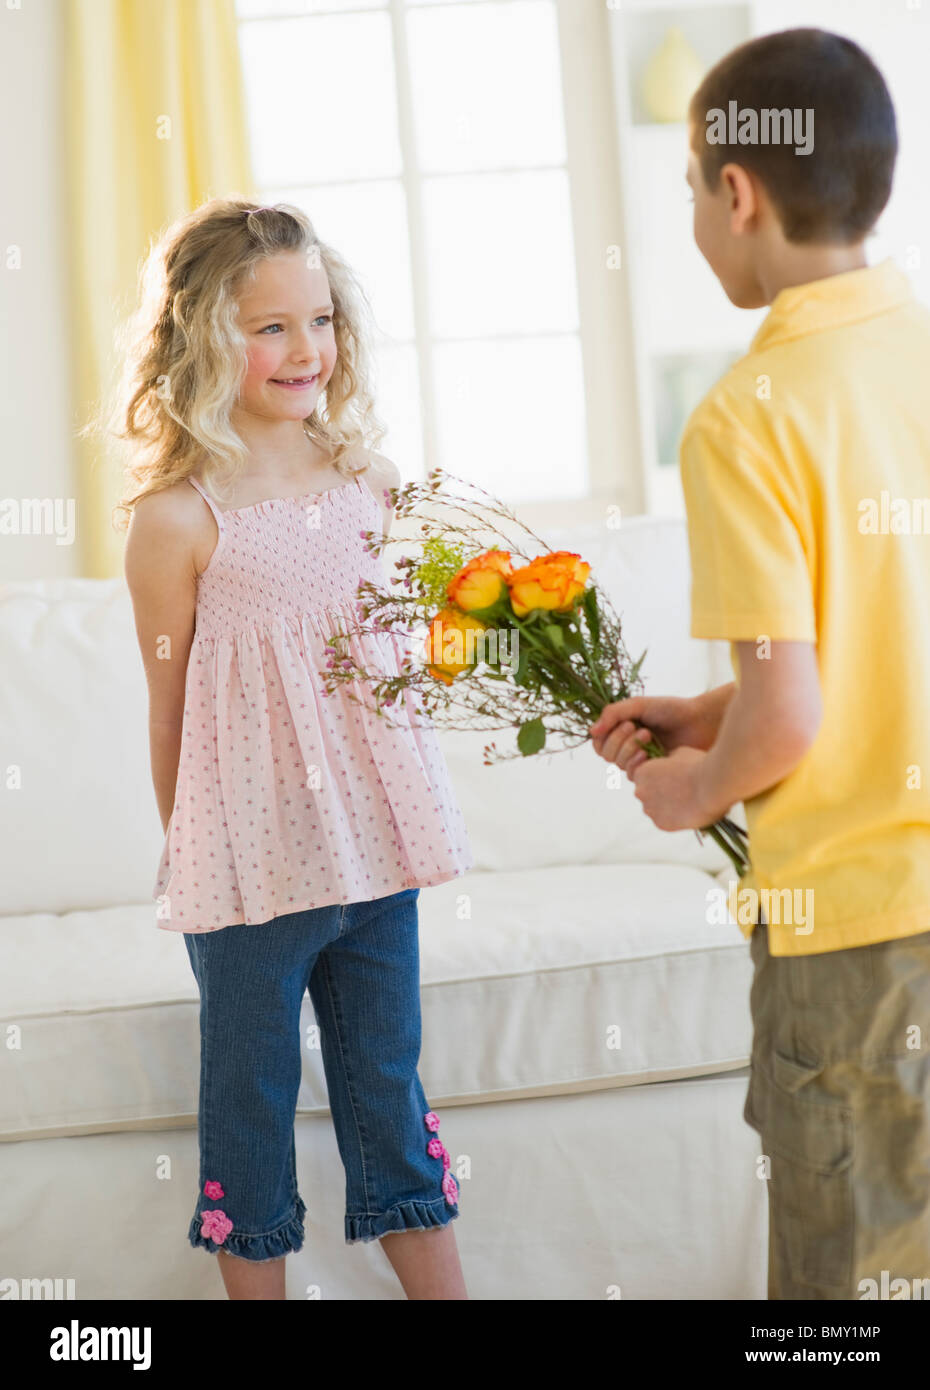 Young boy giving flowers to young girl Stock Photo